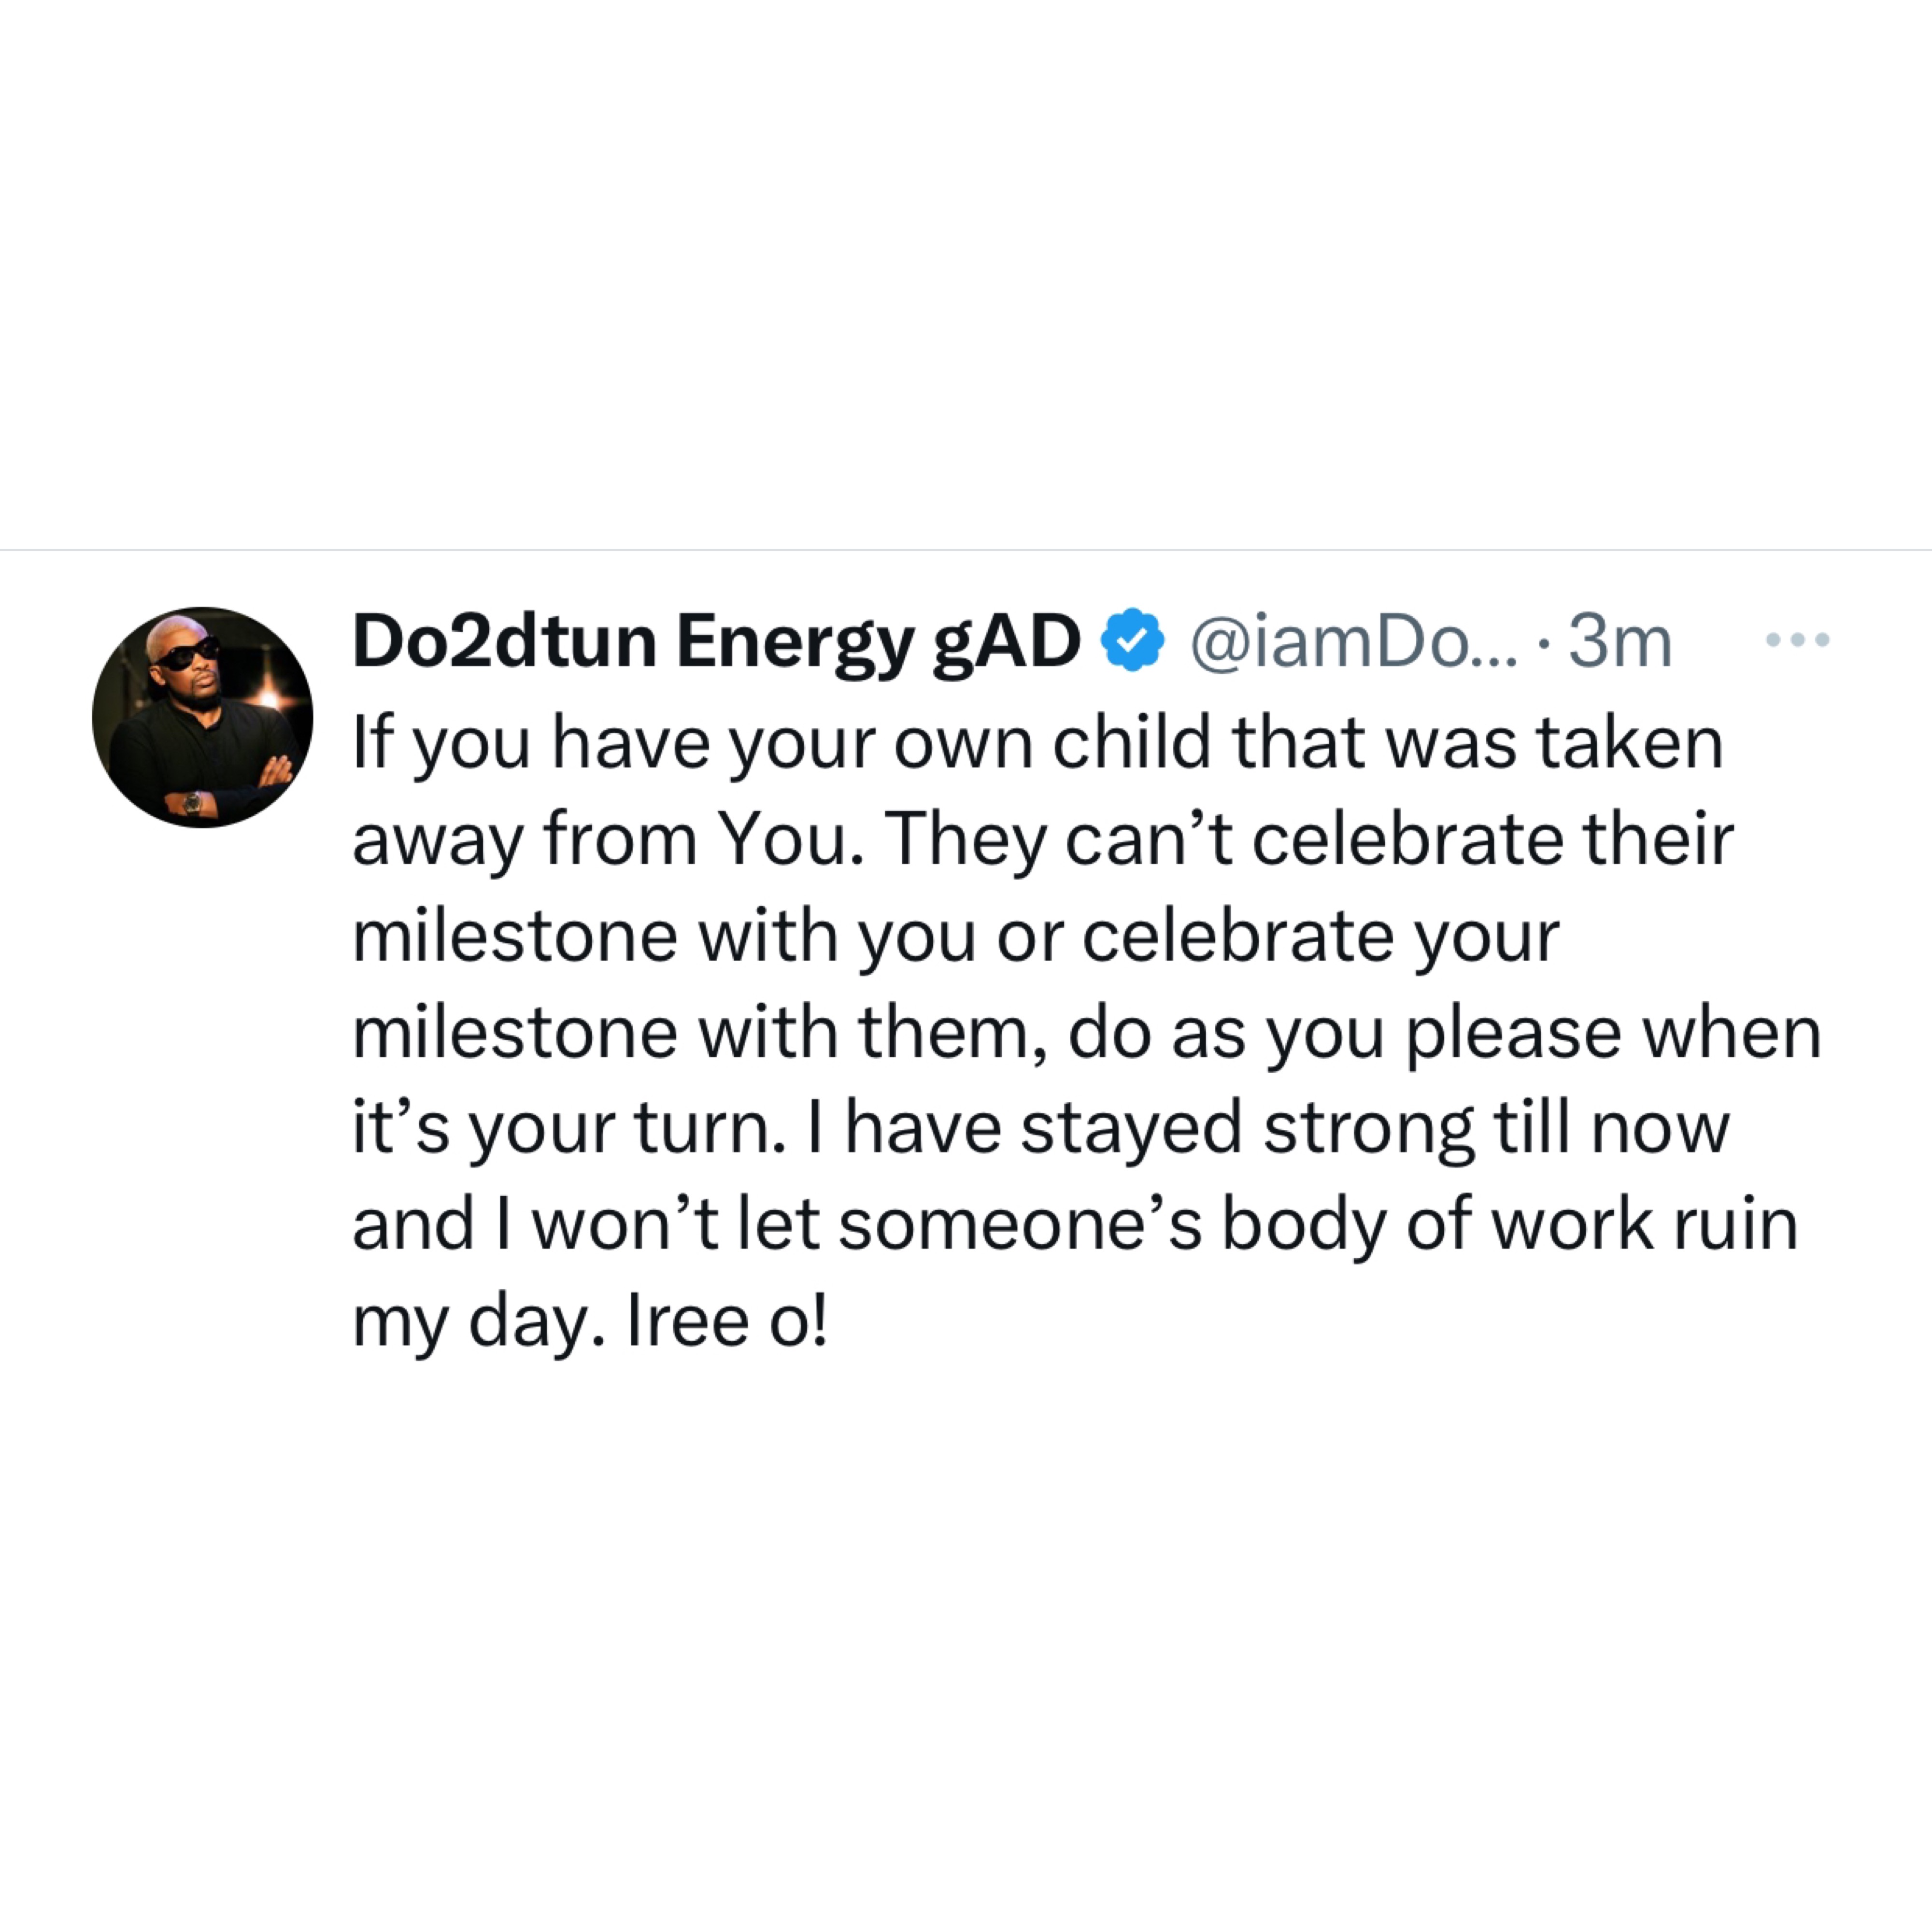 If I am your enemy, I am your enemy full time - OAP Dotun speaks after stopping DJ from playing DBanj